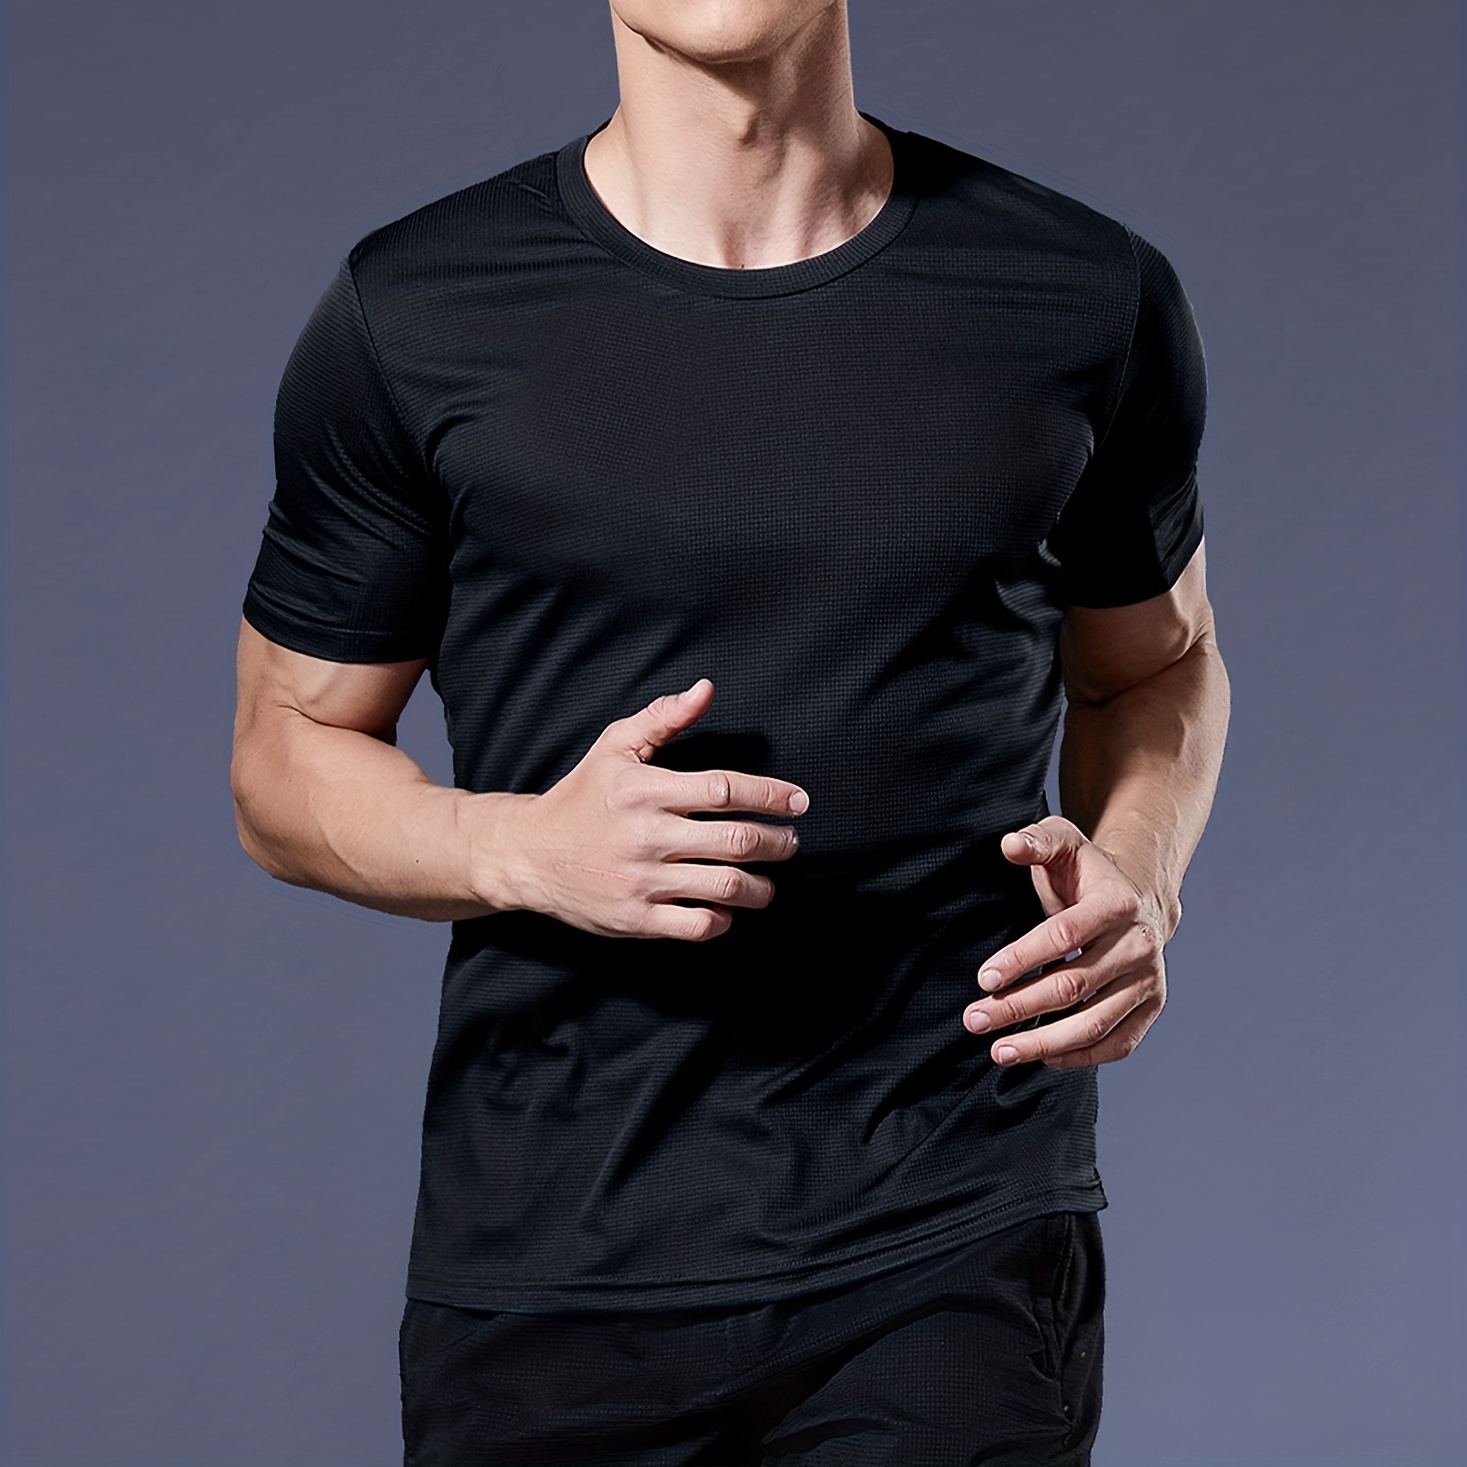 

Men's Short Sleeve Ultralight Athletic T-shirt: Quick Drying Lightweight Performance For Running, Training, Fitness & Gym Workouts